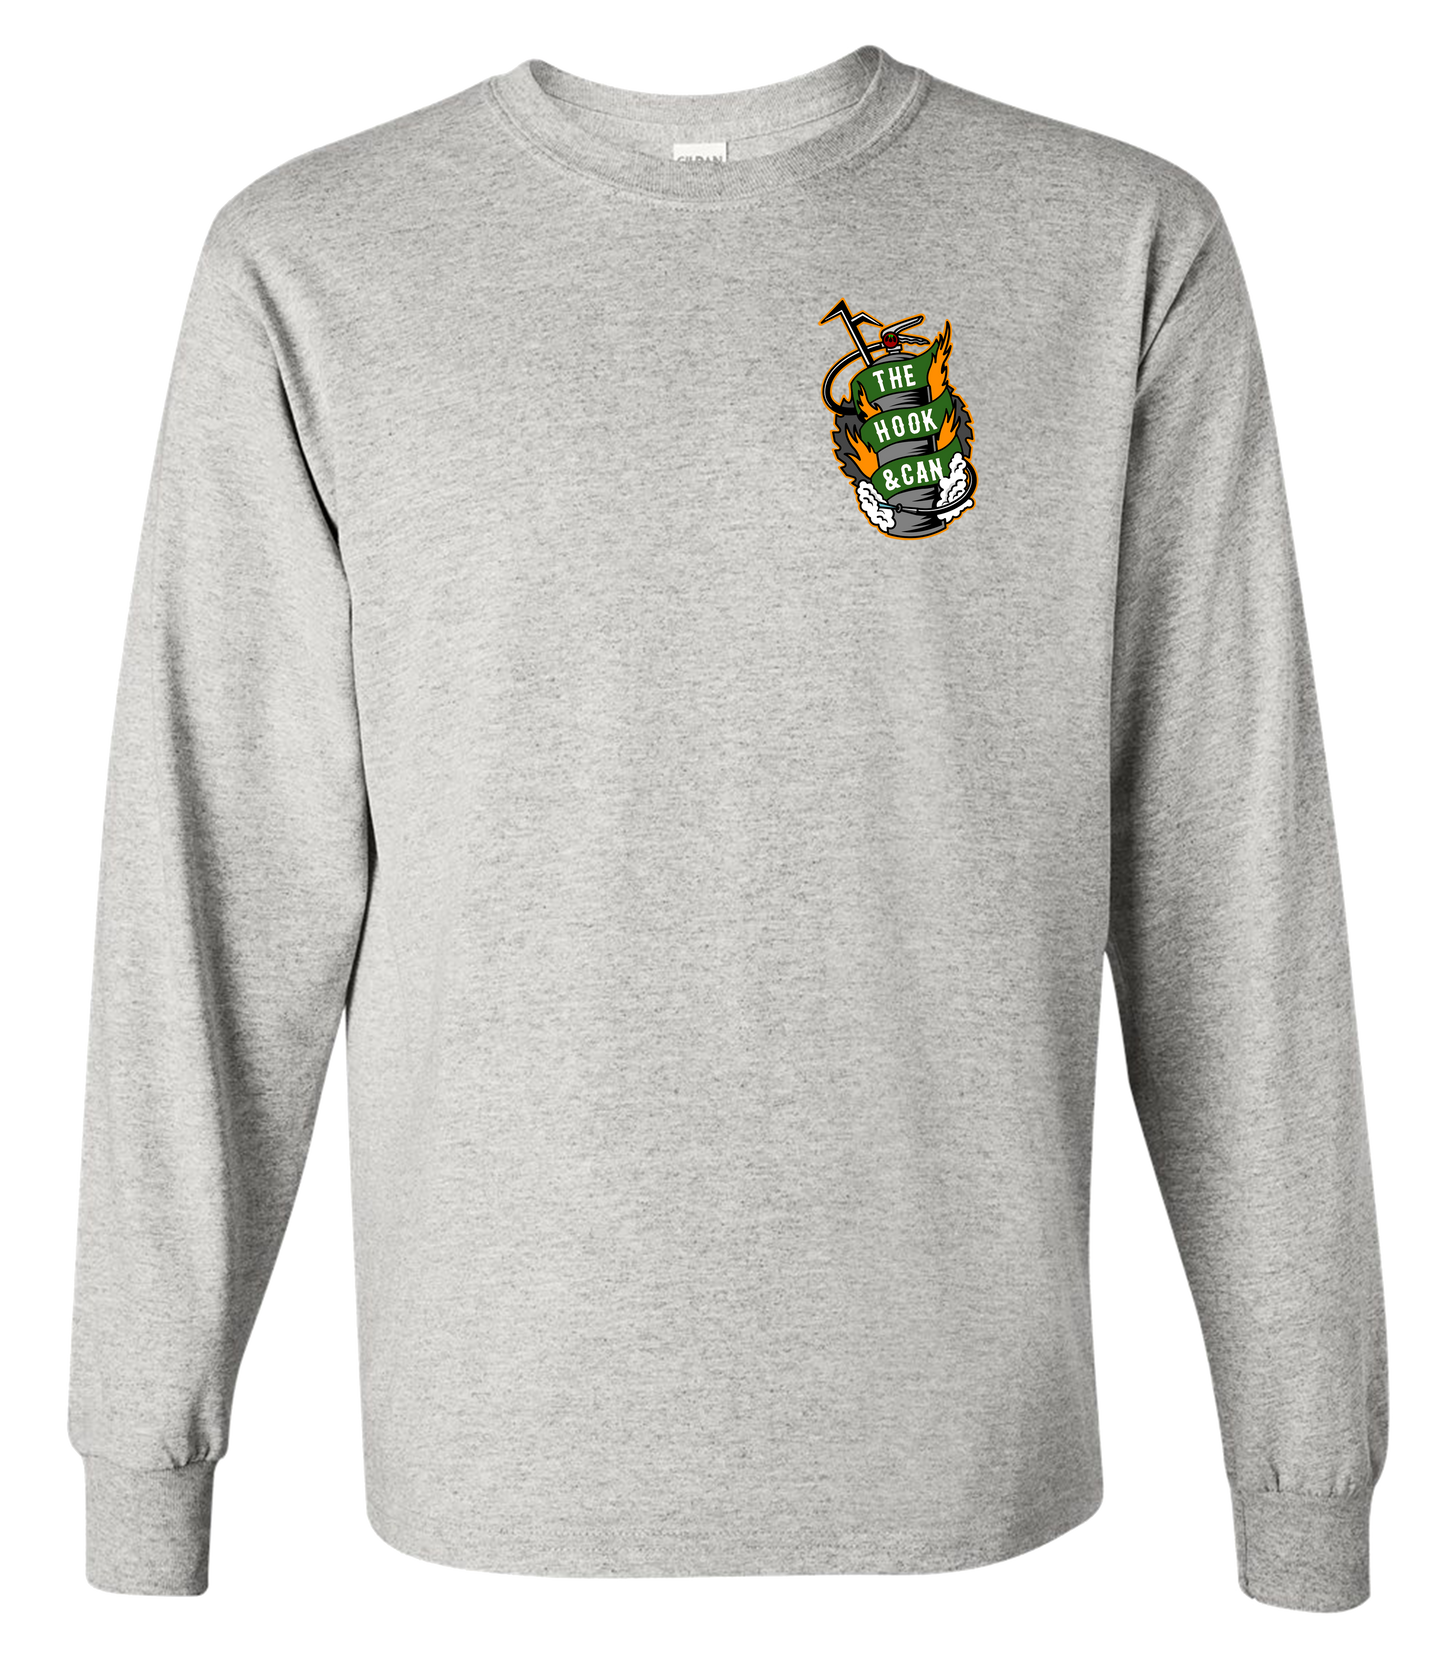 The Hook & Can Long Sleeve St. Patrick's Day T-Shirt (New Design)